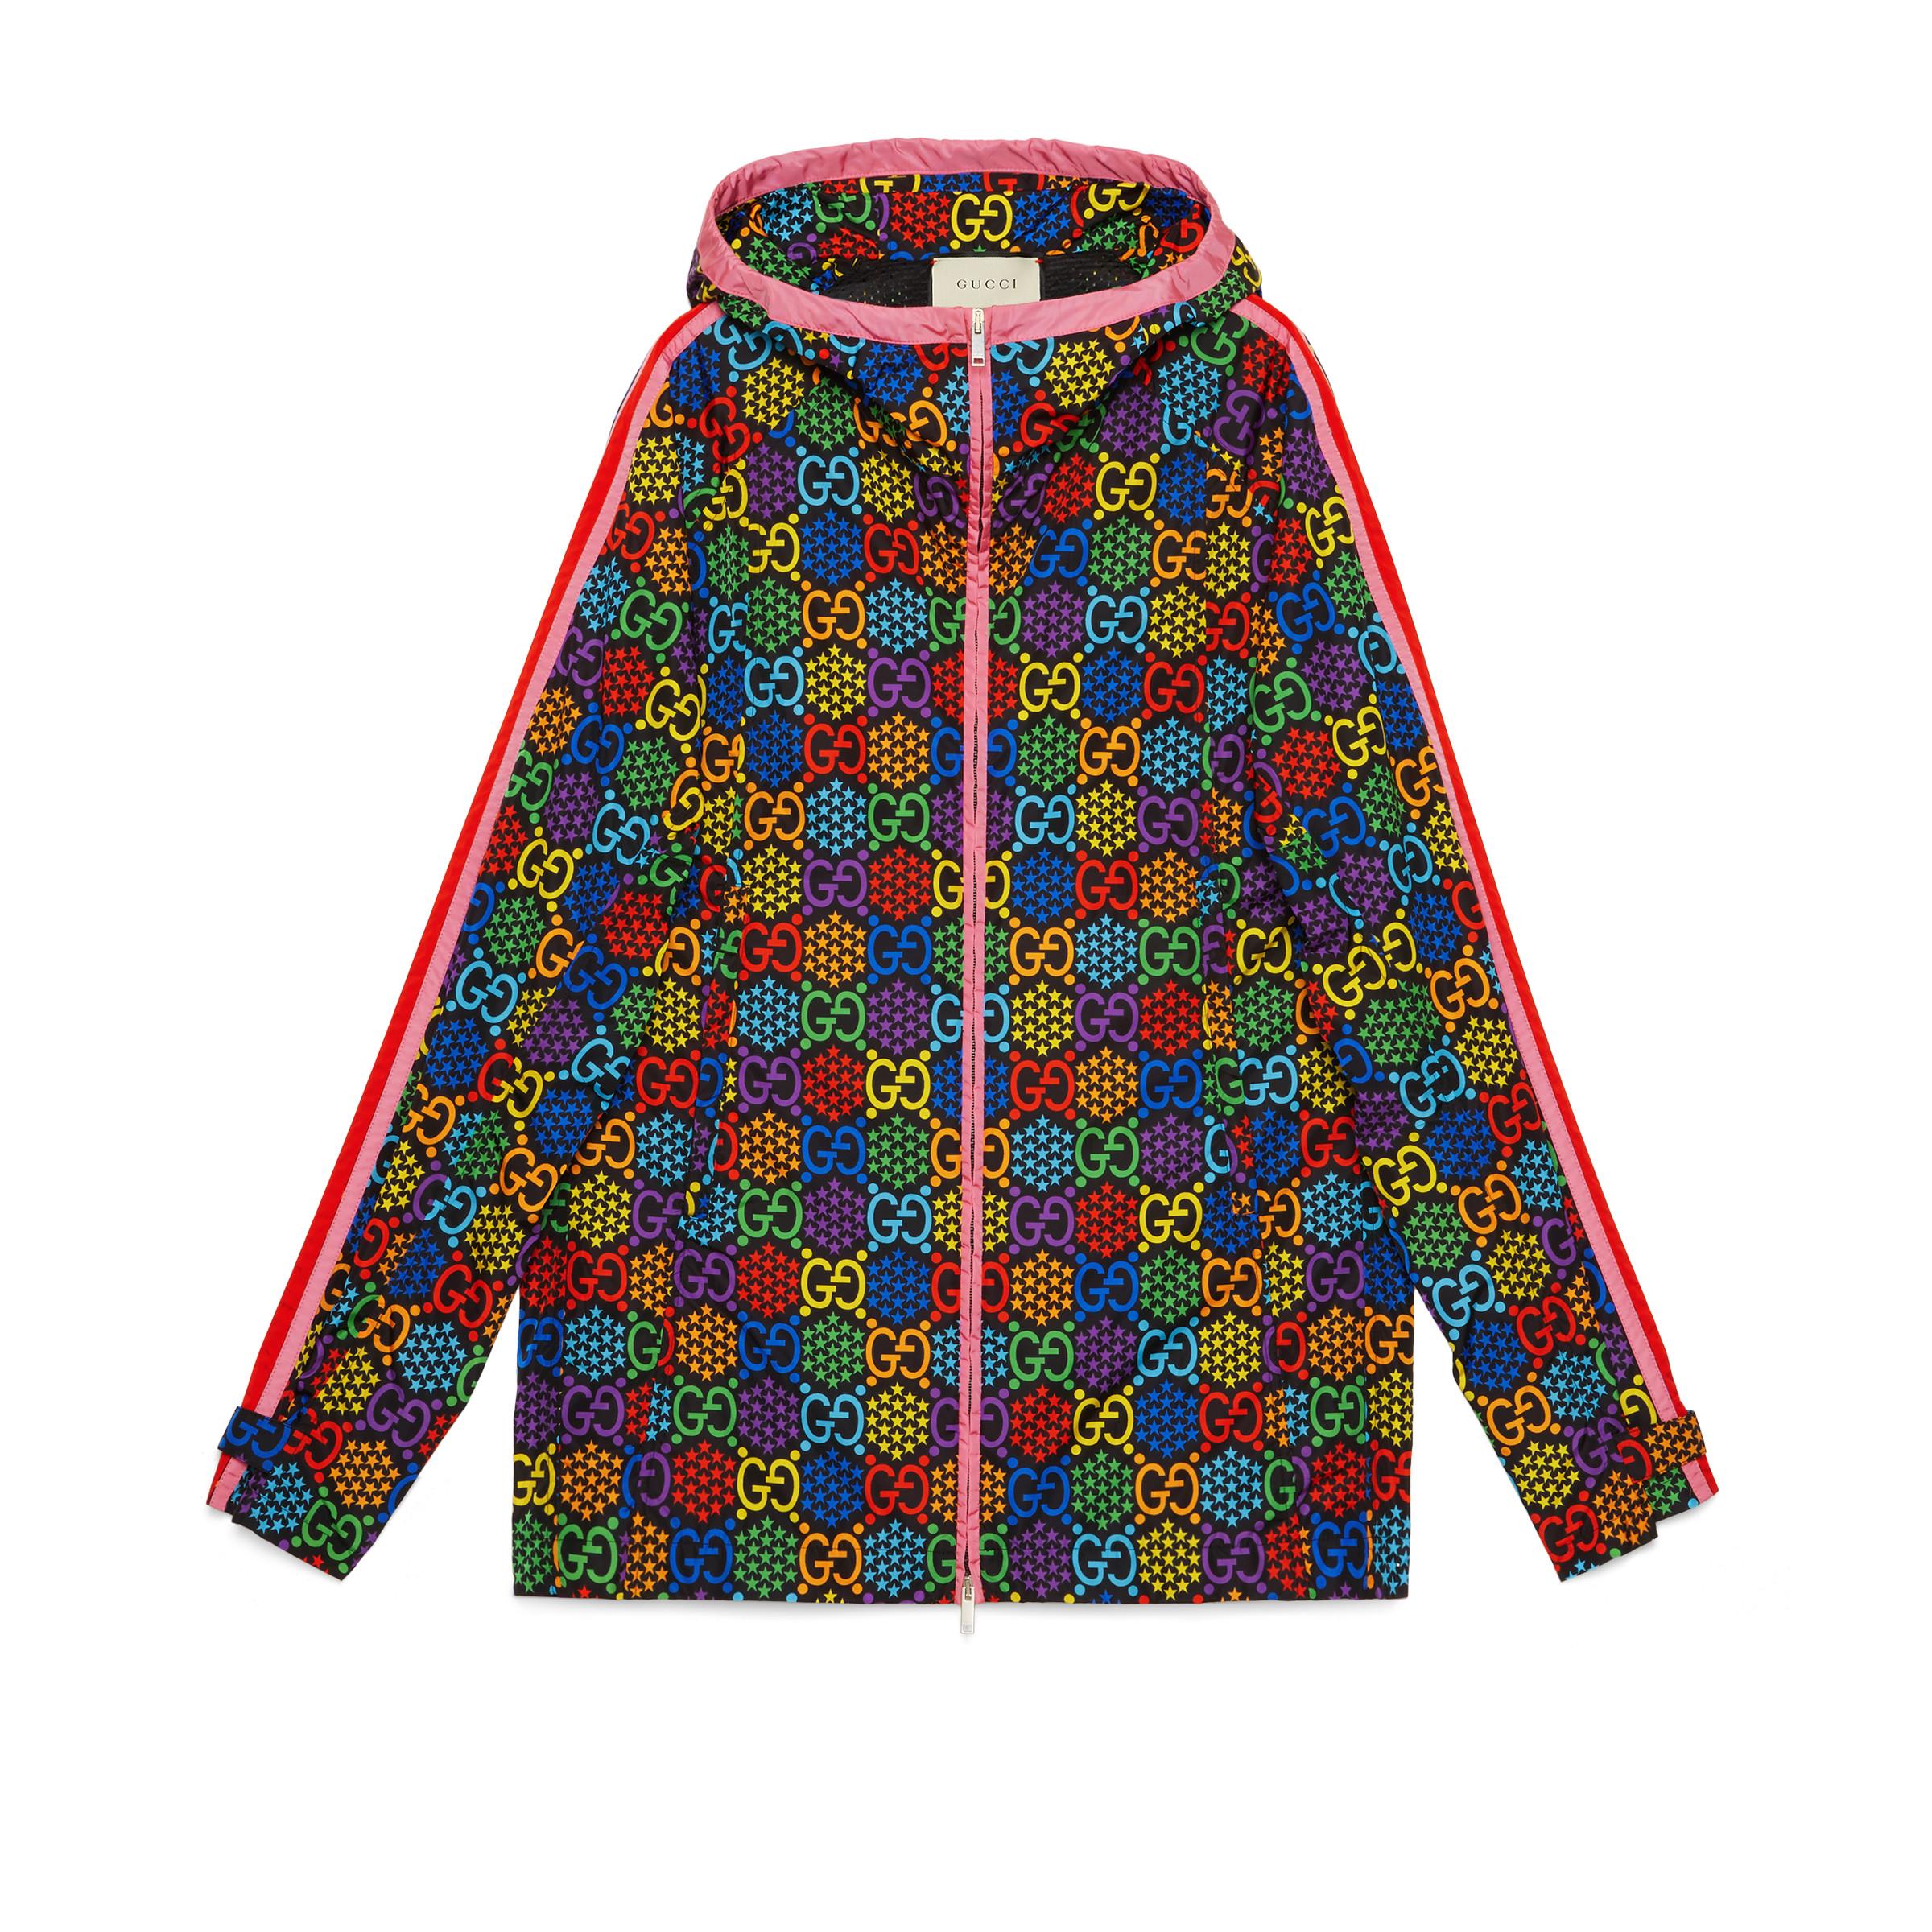 Gucci Synthetic GG Psychedelic Print Nylon Jacket in Black | Lyst